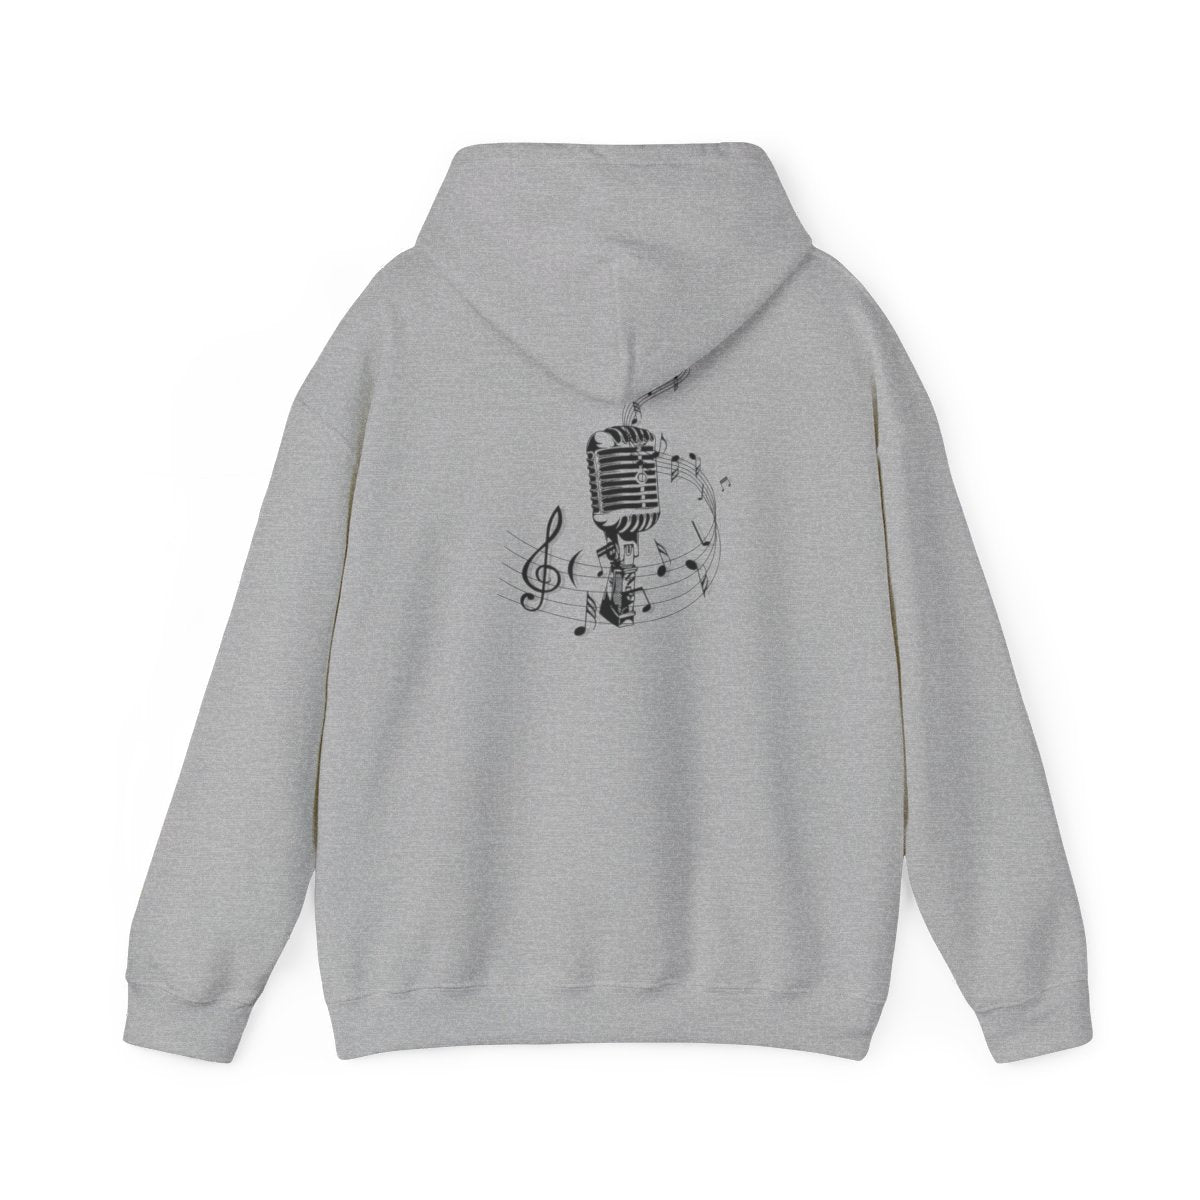 Taylor Swift High Quality Unisex Heavy Blend™ Hoodie